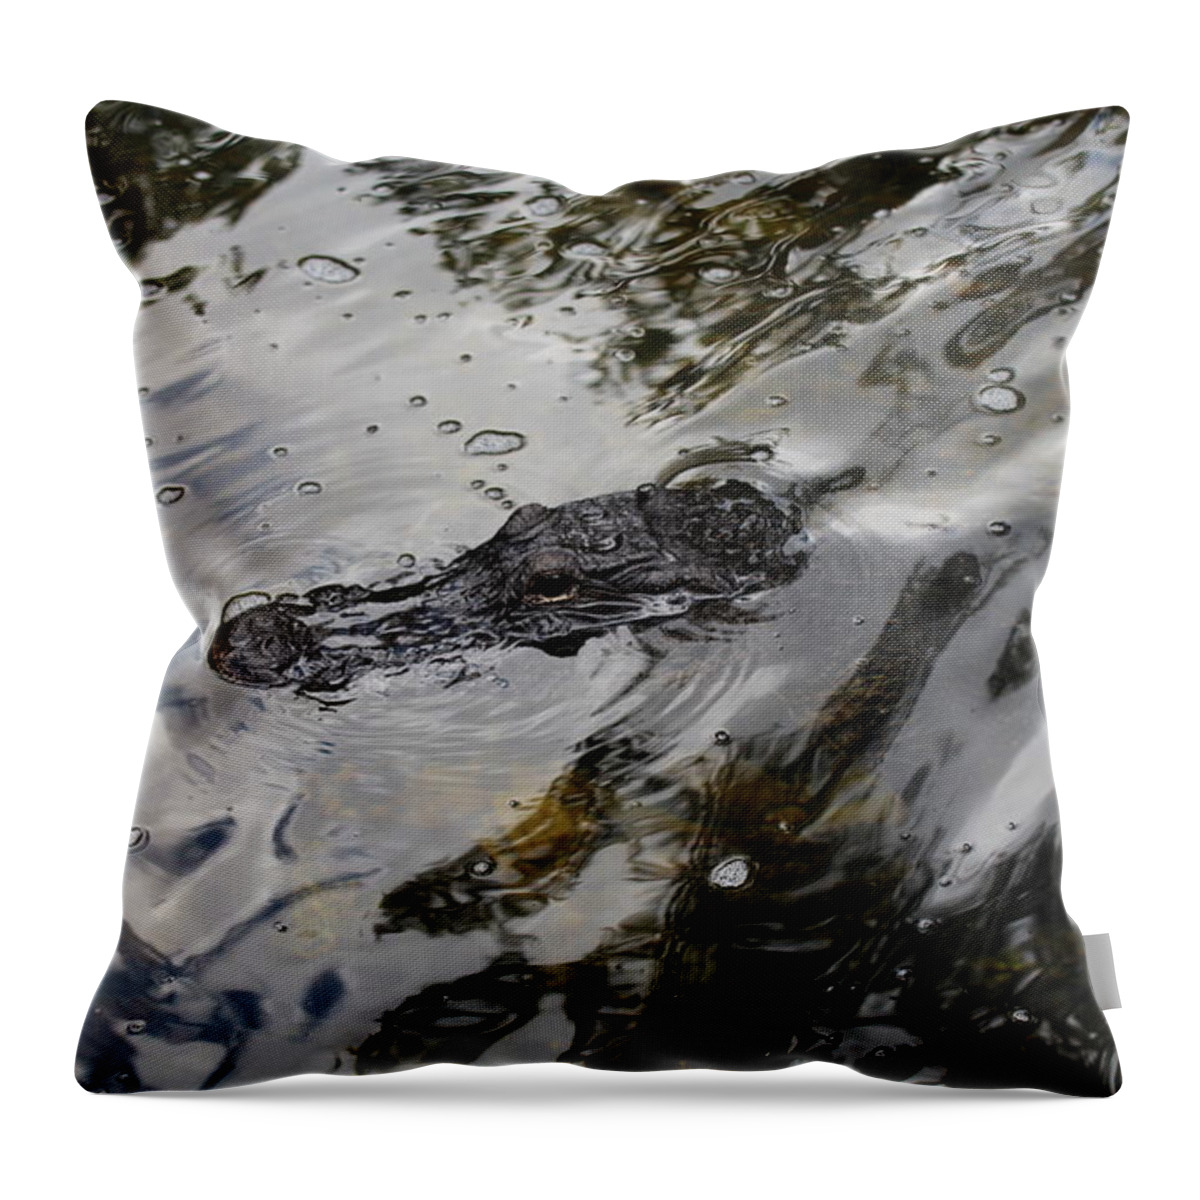 Alligator Throw Pillow featuring the photograph Gator Profile by Denise Cicchella